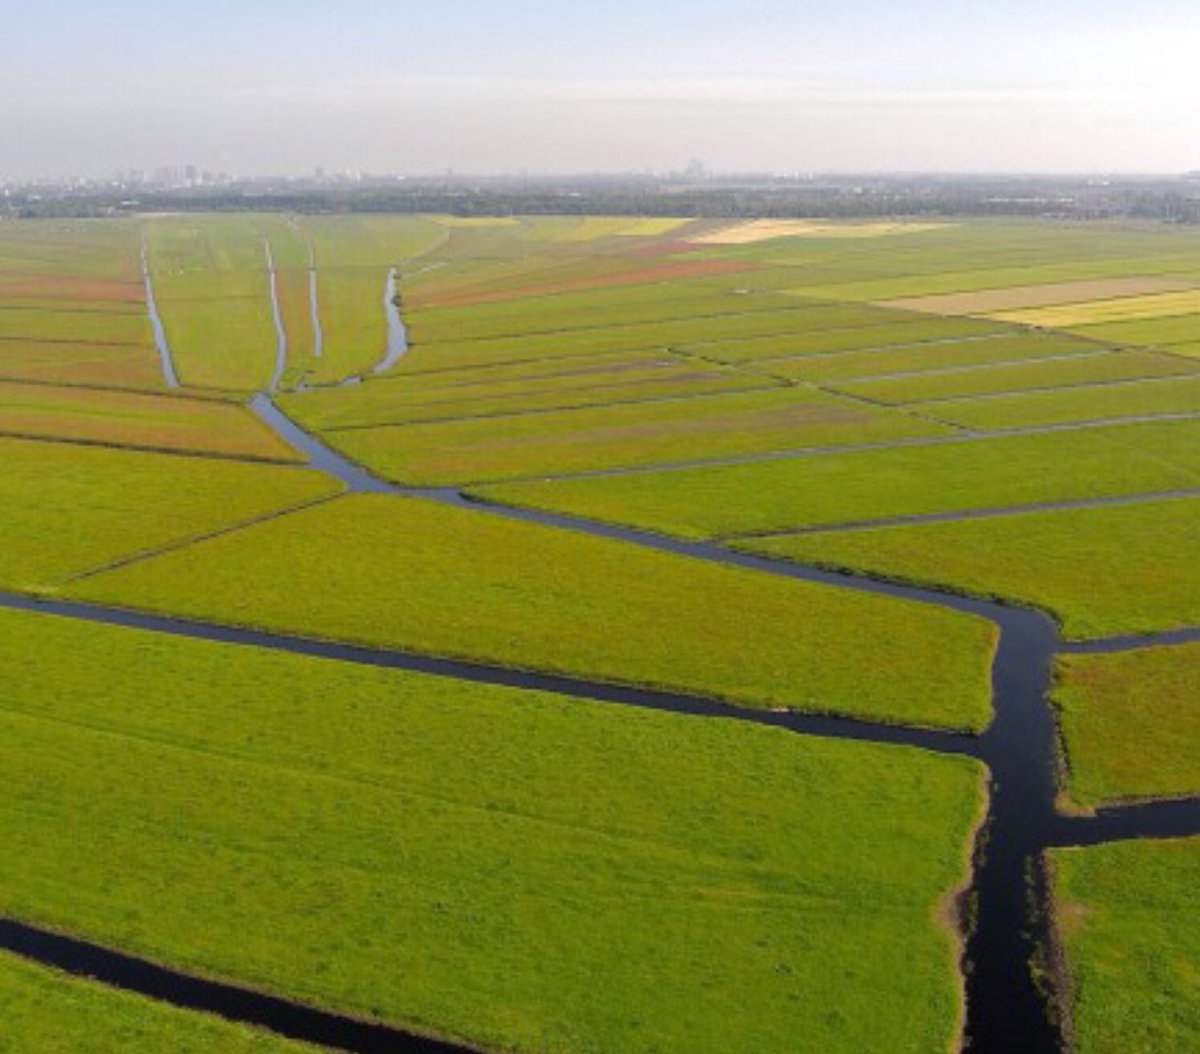 8. So, I know you’ve seen this photo of Reach Lode before. See how the lode is embanked? Why build the banks? They’re not essential to keep the water in the lode as the Dutch polder landscape on the R shows ( https://www.collectiefnhz.nl/amstelland/ronde-hoep). I think it is to keep water out of the fen.